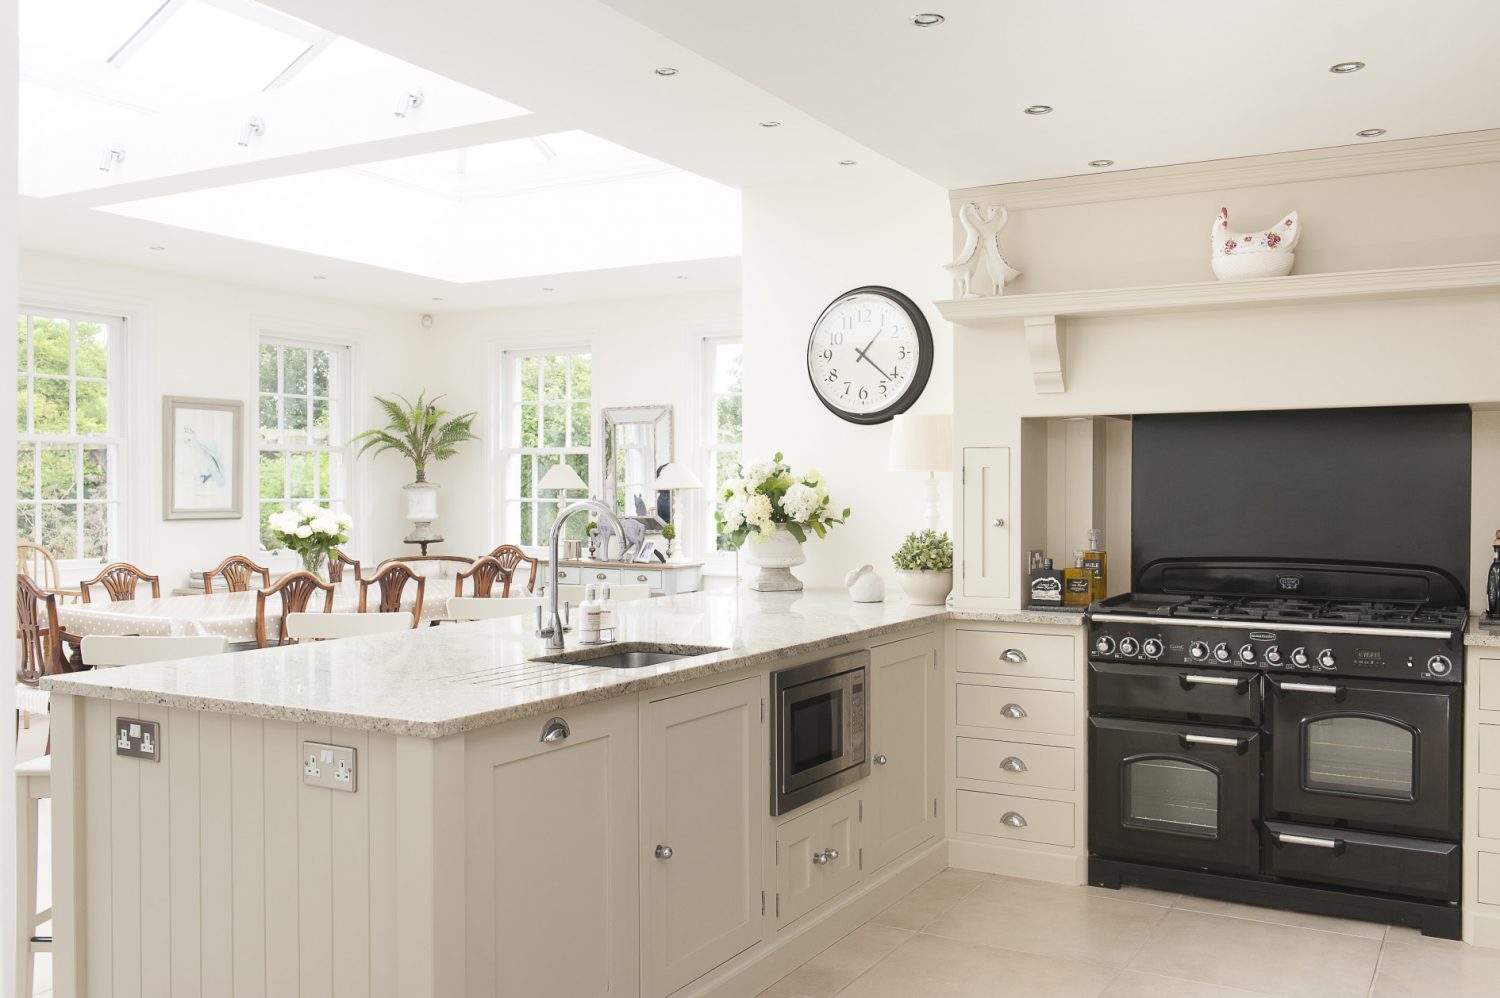 The kitchen has been extended to include a spacious orangery